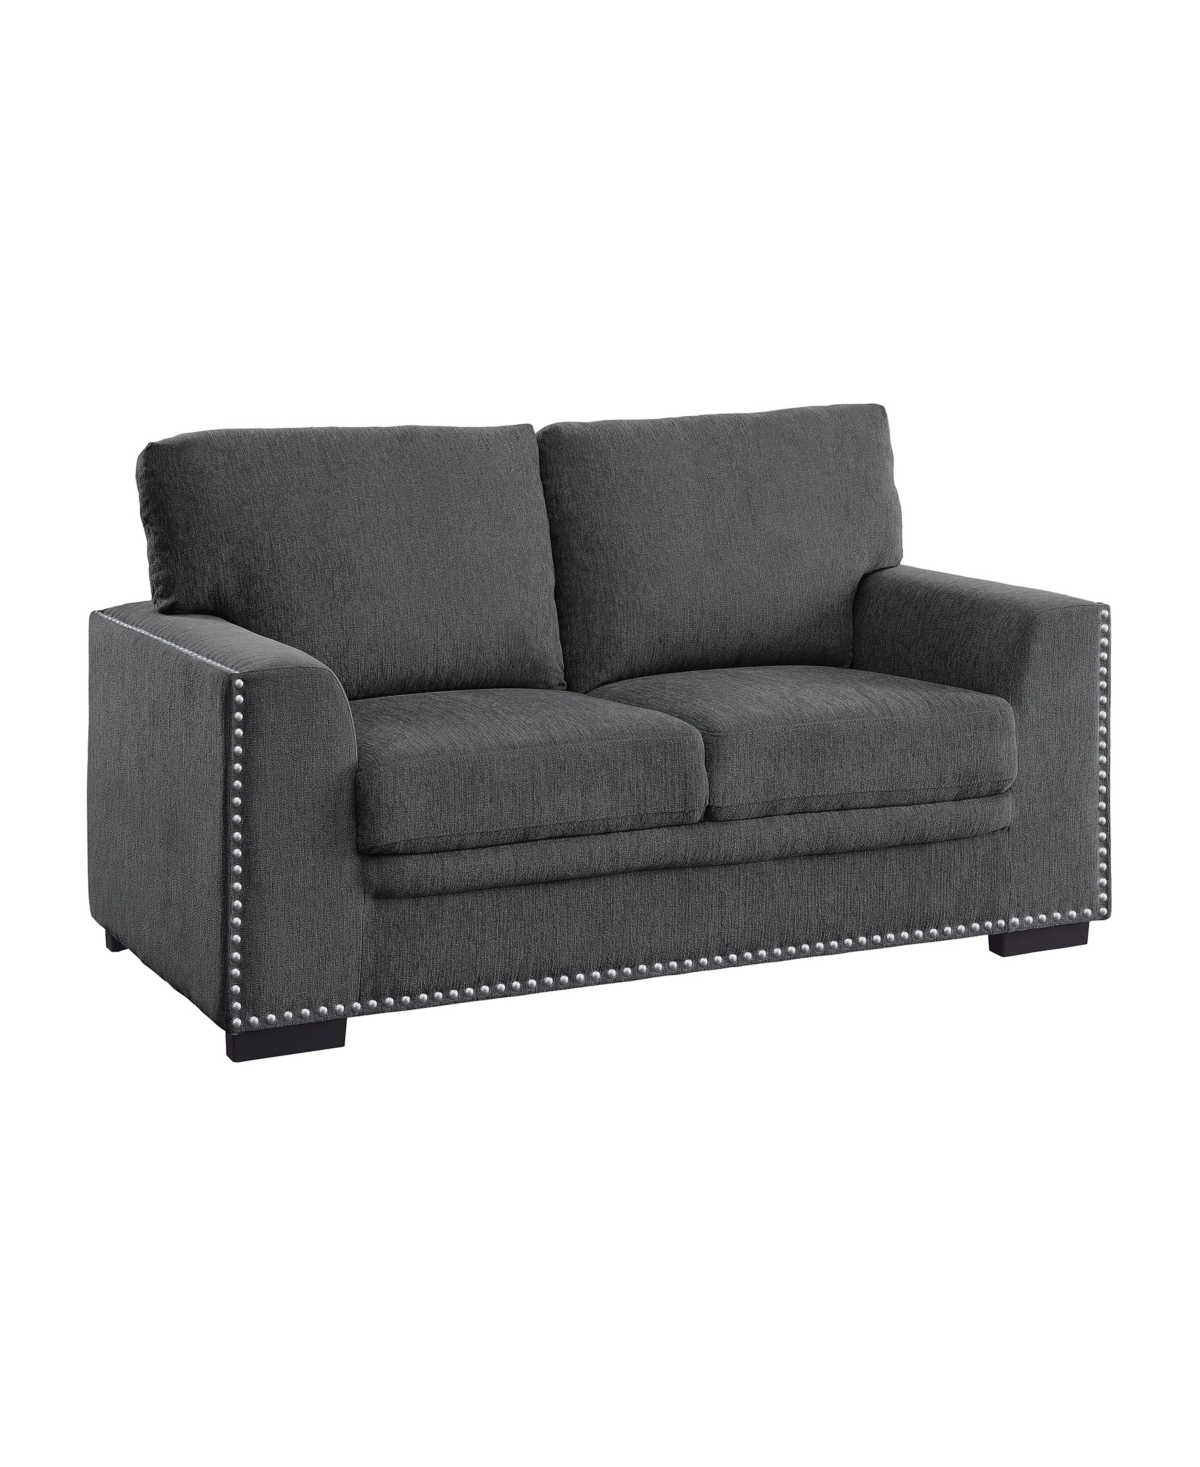 Homelegance White Label Dickinson 62" Love Seat In Charcoal